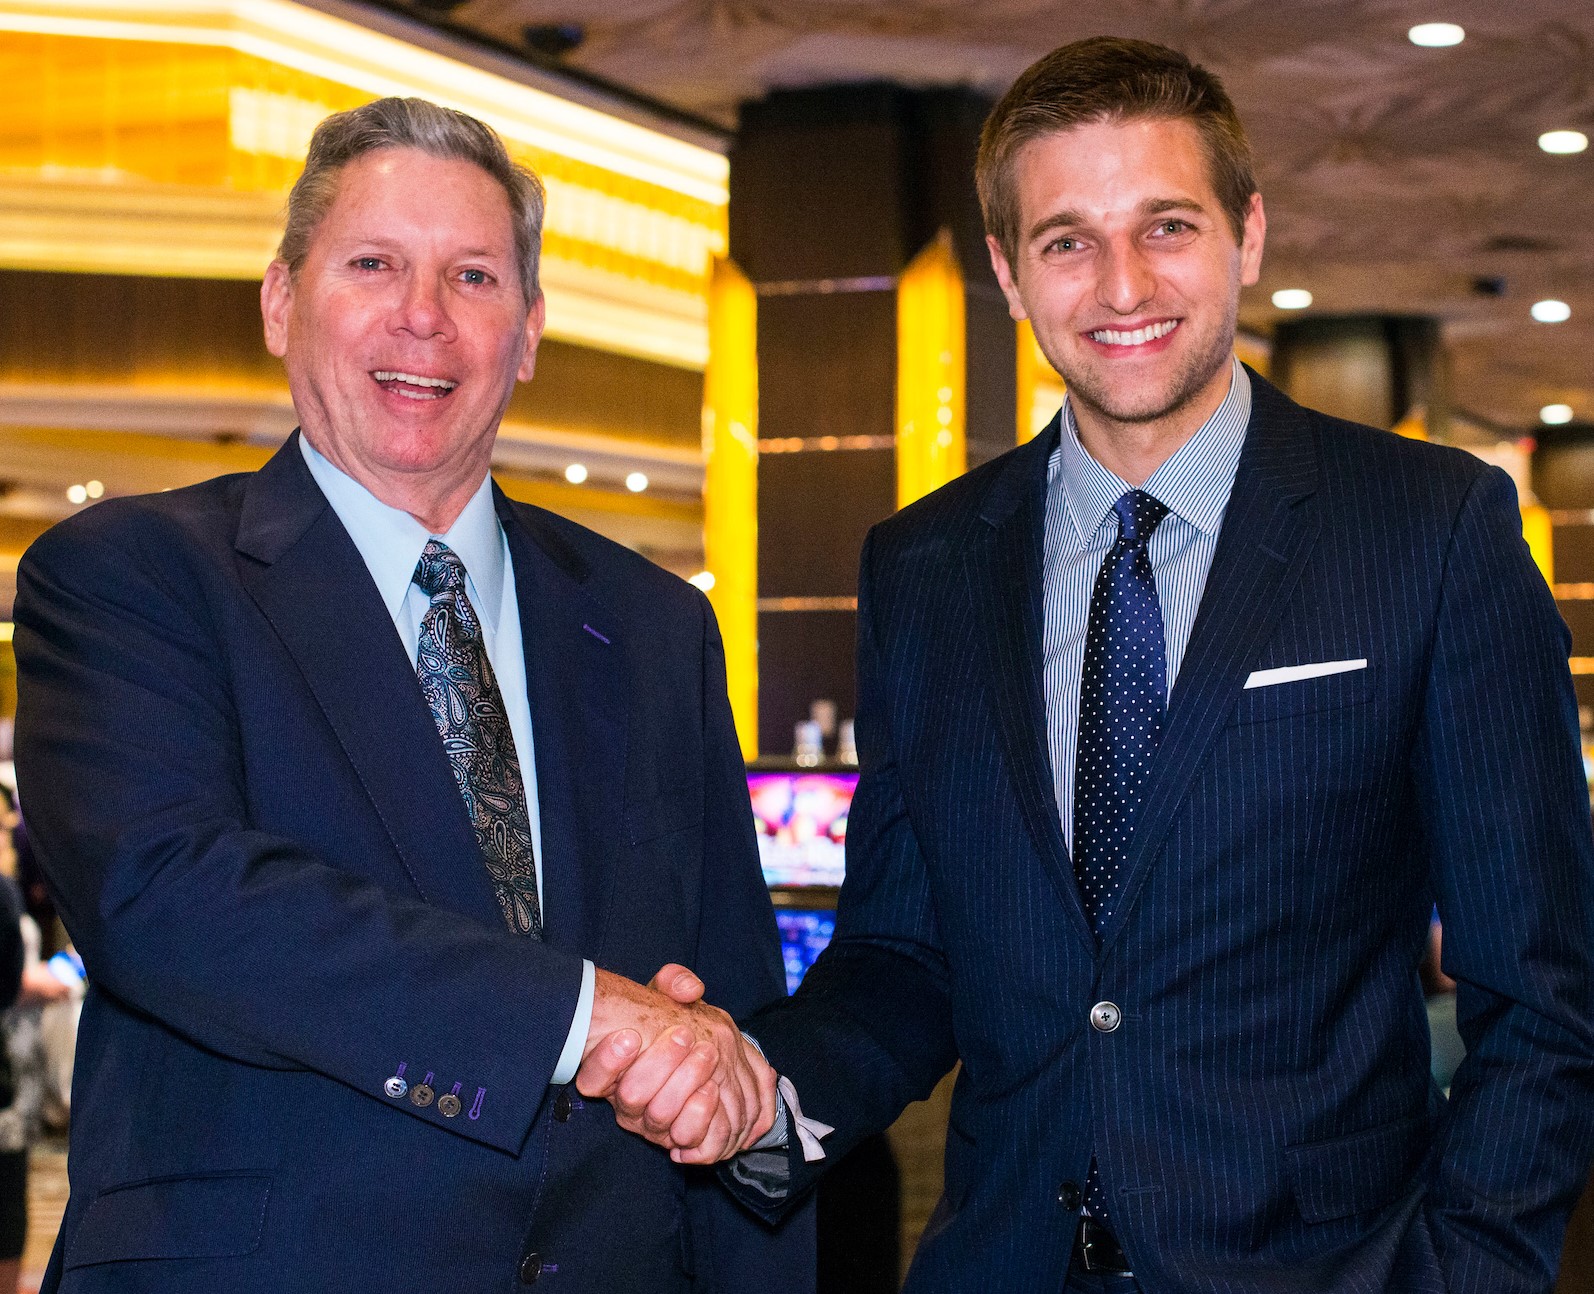 Mike Sexton Leaving WPT Commentator Spot, Tony Dunst Stepping In